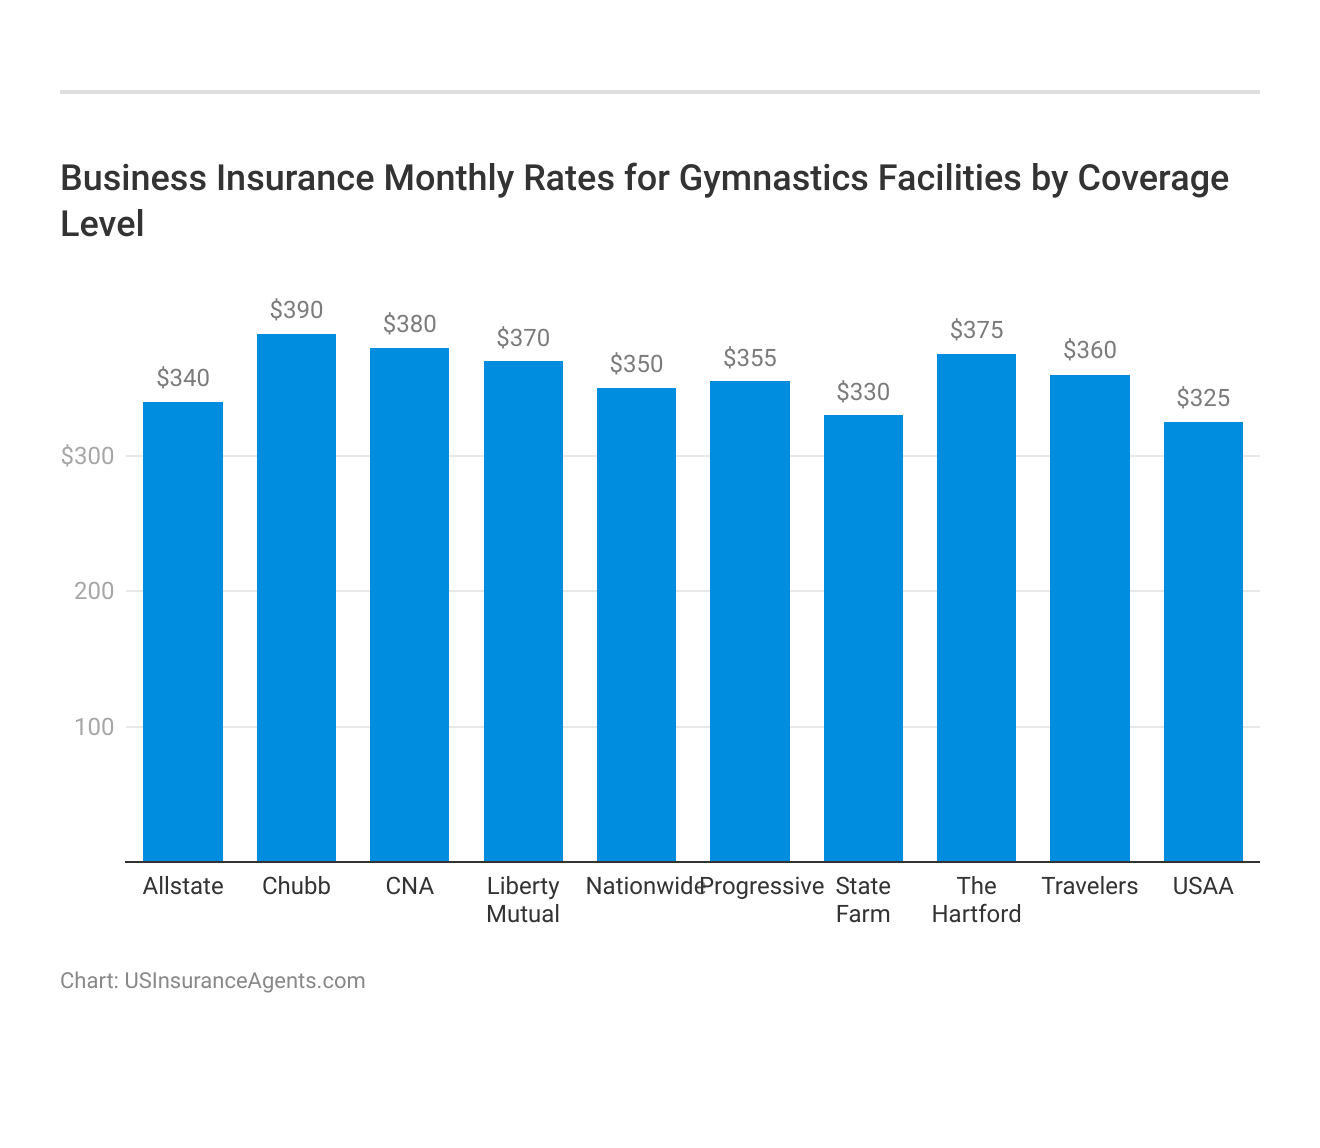 <h3>Business Insurance Monthly Rates for Gymnastics Facilities by Coverage Level</h3>